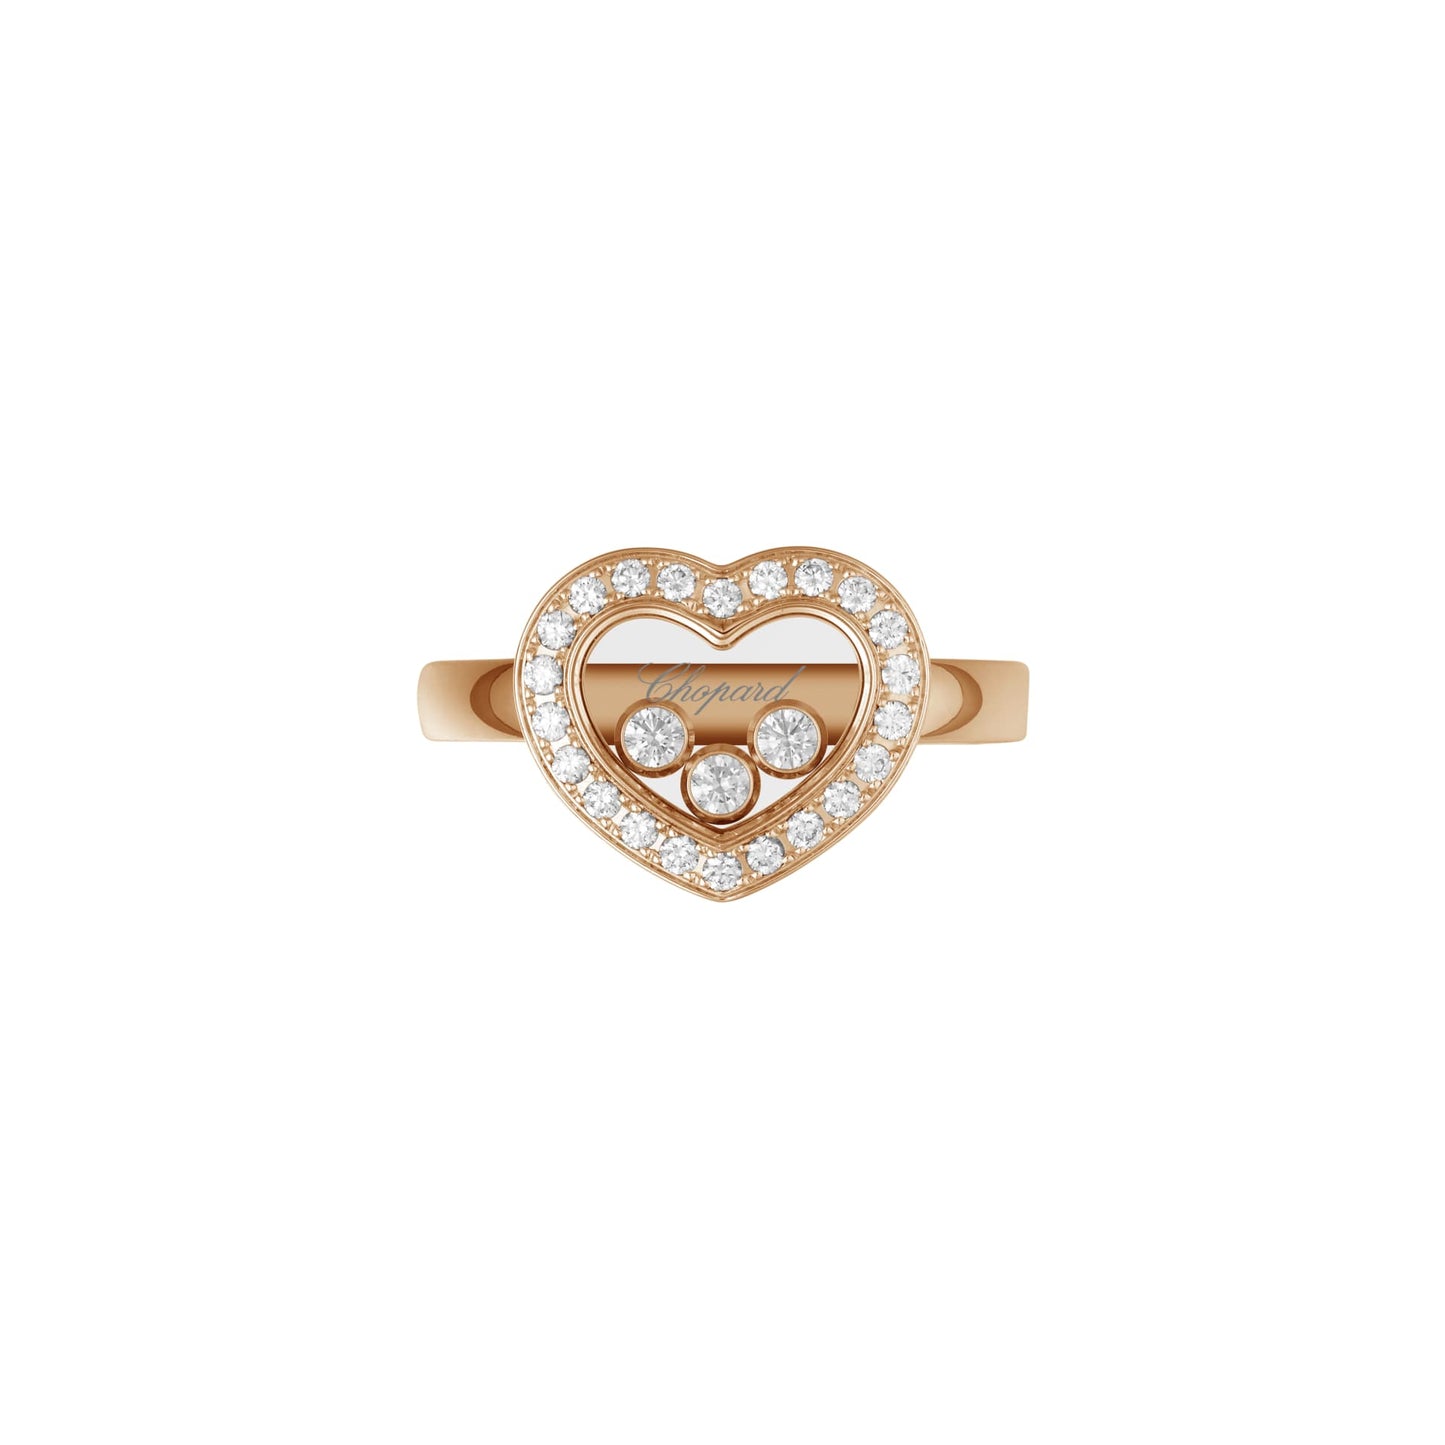 HAPPY DIAMONDS ICONS RING, ETHICAL ROSE GOLD, DIAMONDS 82A611-5200